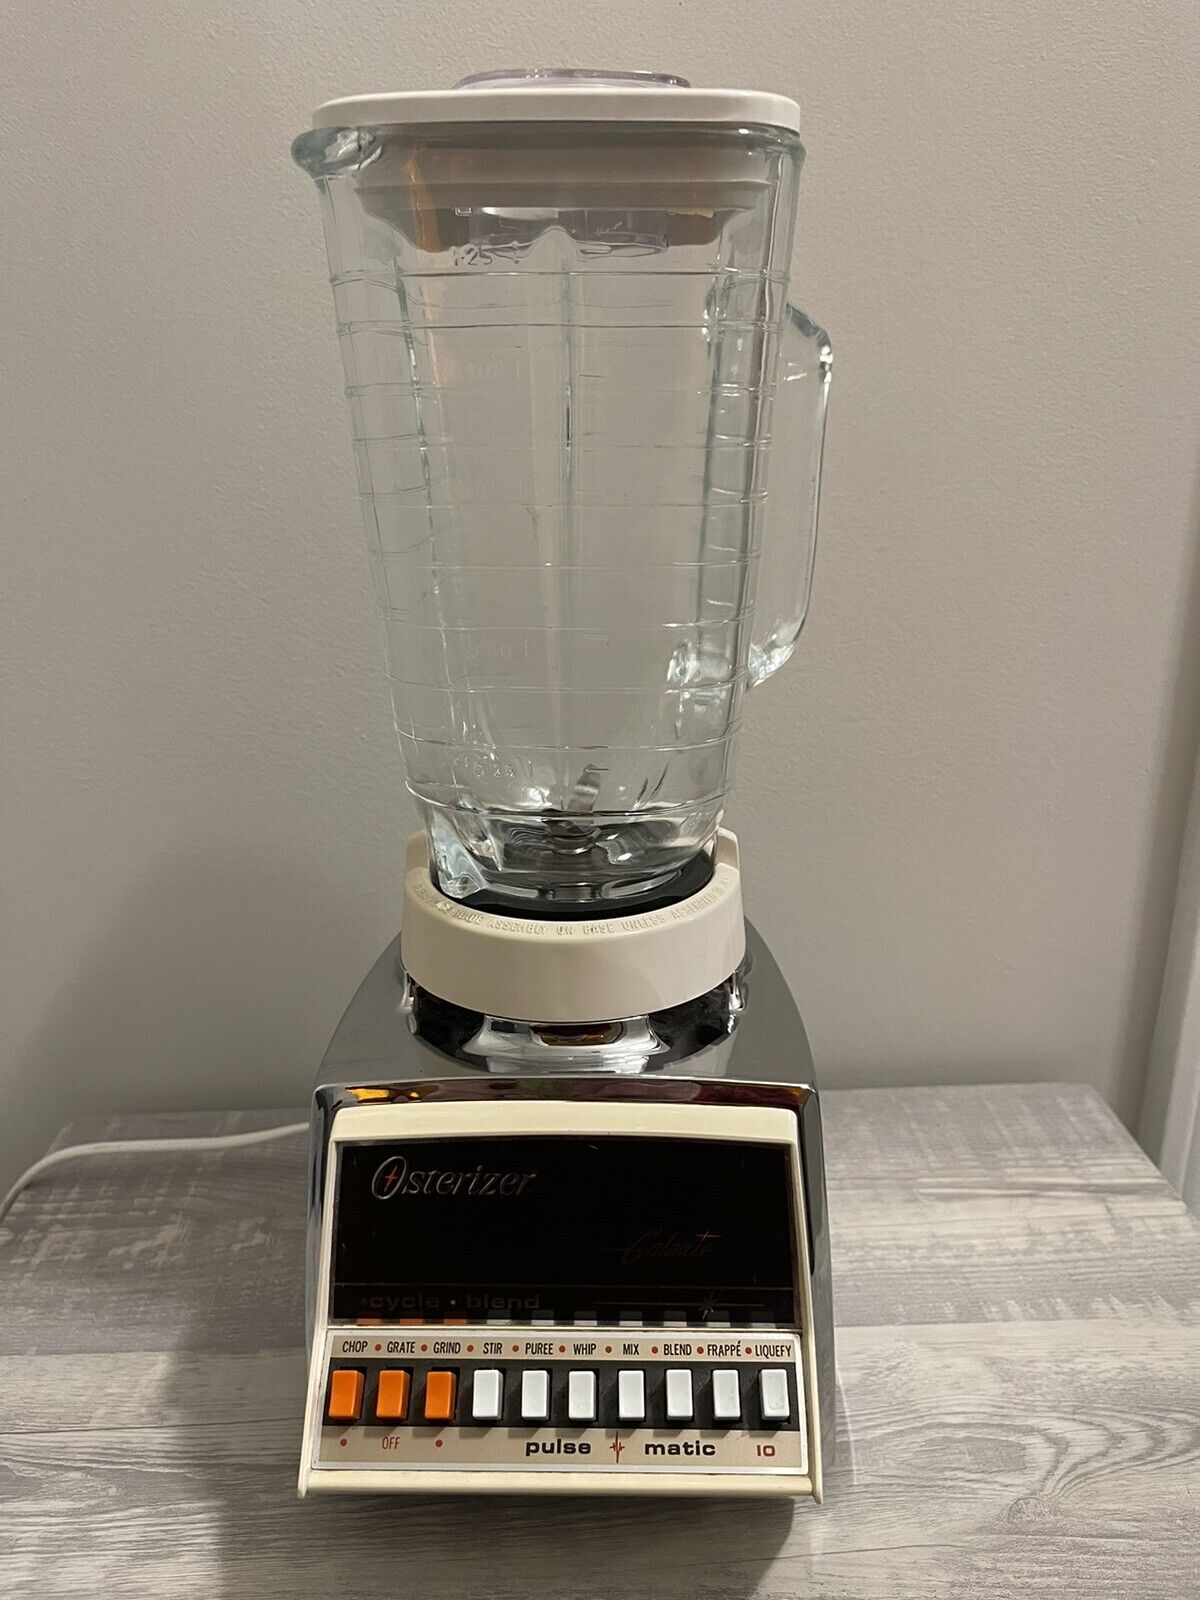 Vintage Osterizer Galaxie Pulse Matic 10 Blender